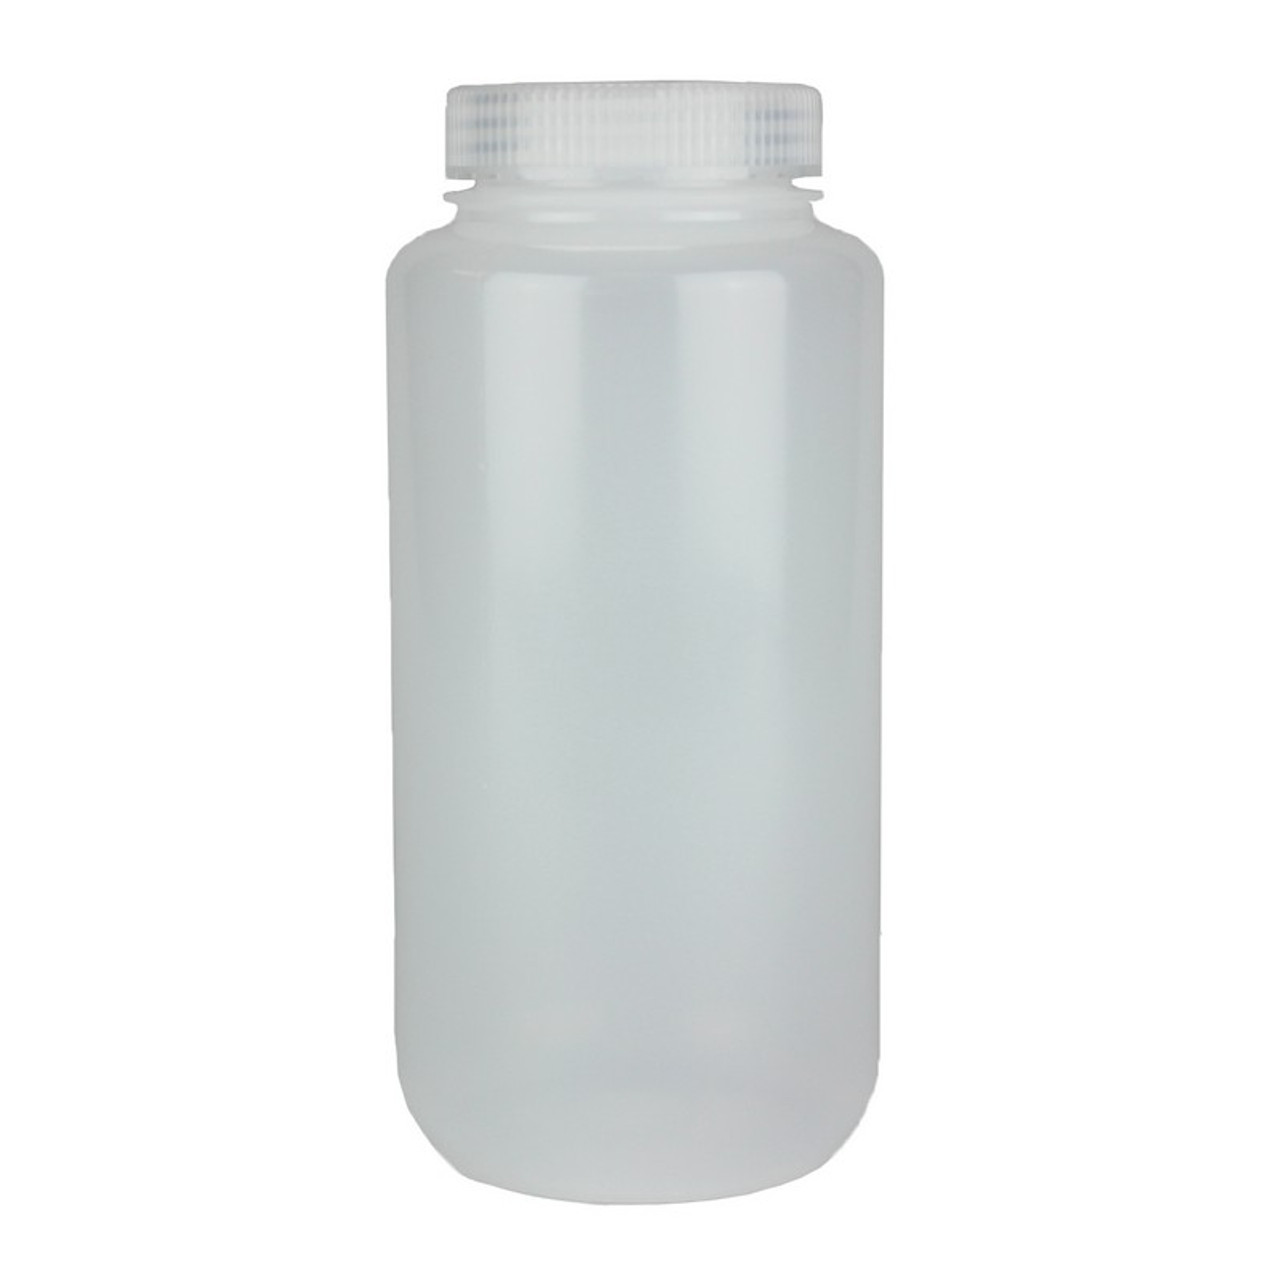 Certified, Clean 32oz Wide Mouth Sample Bottles with Screw Caps, HDPE, Nalgene, case/12